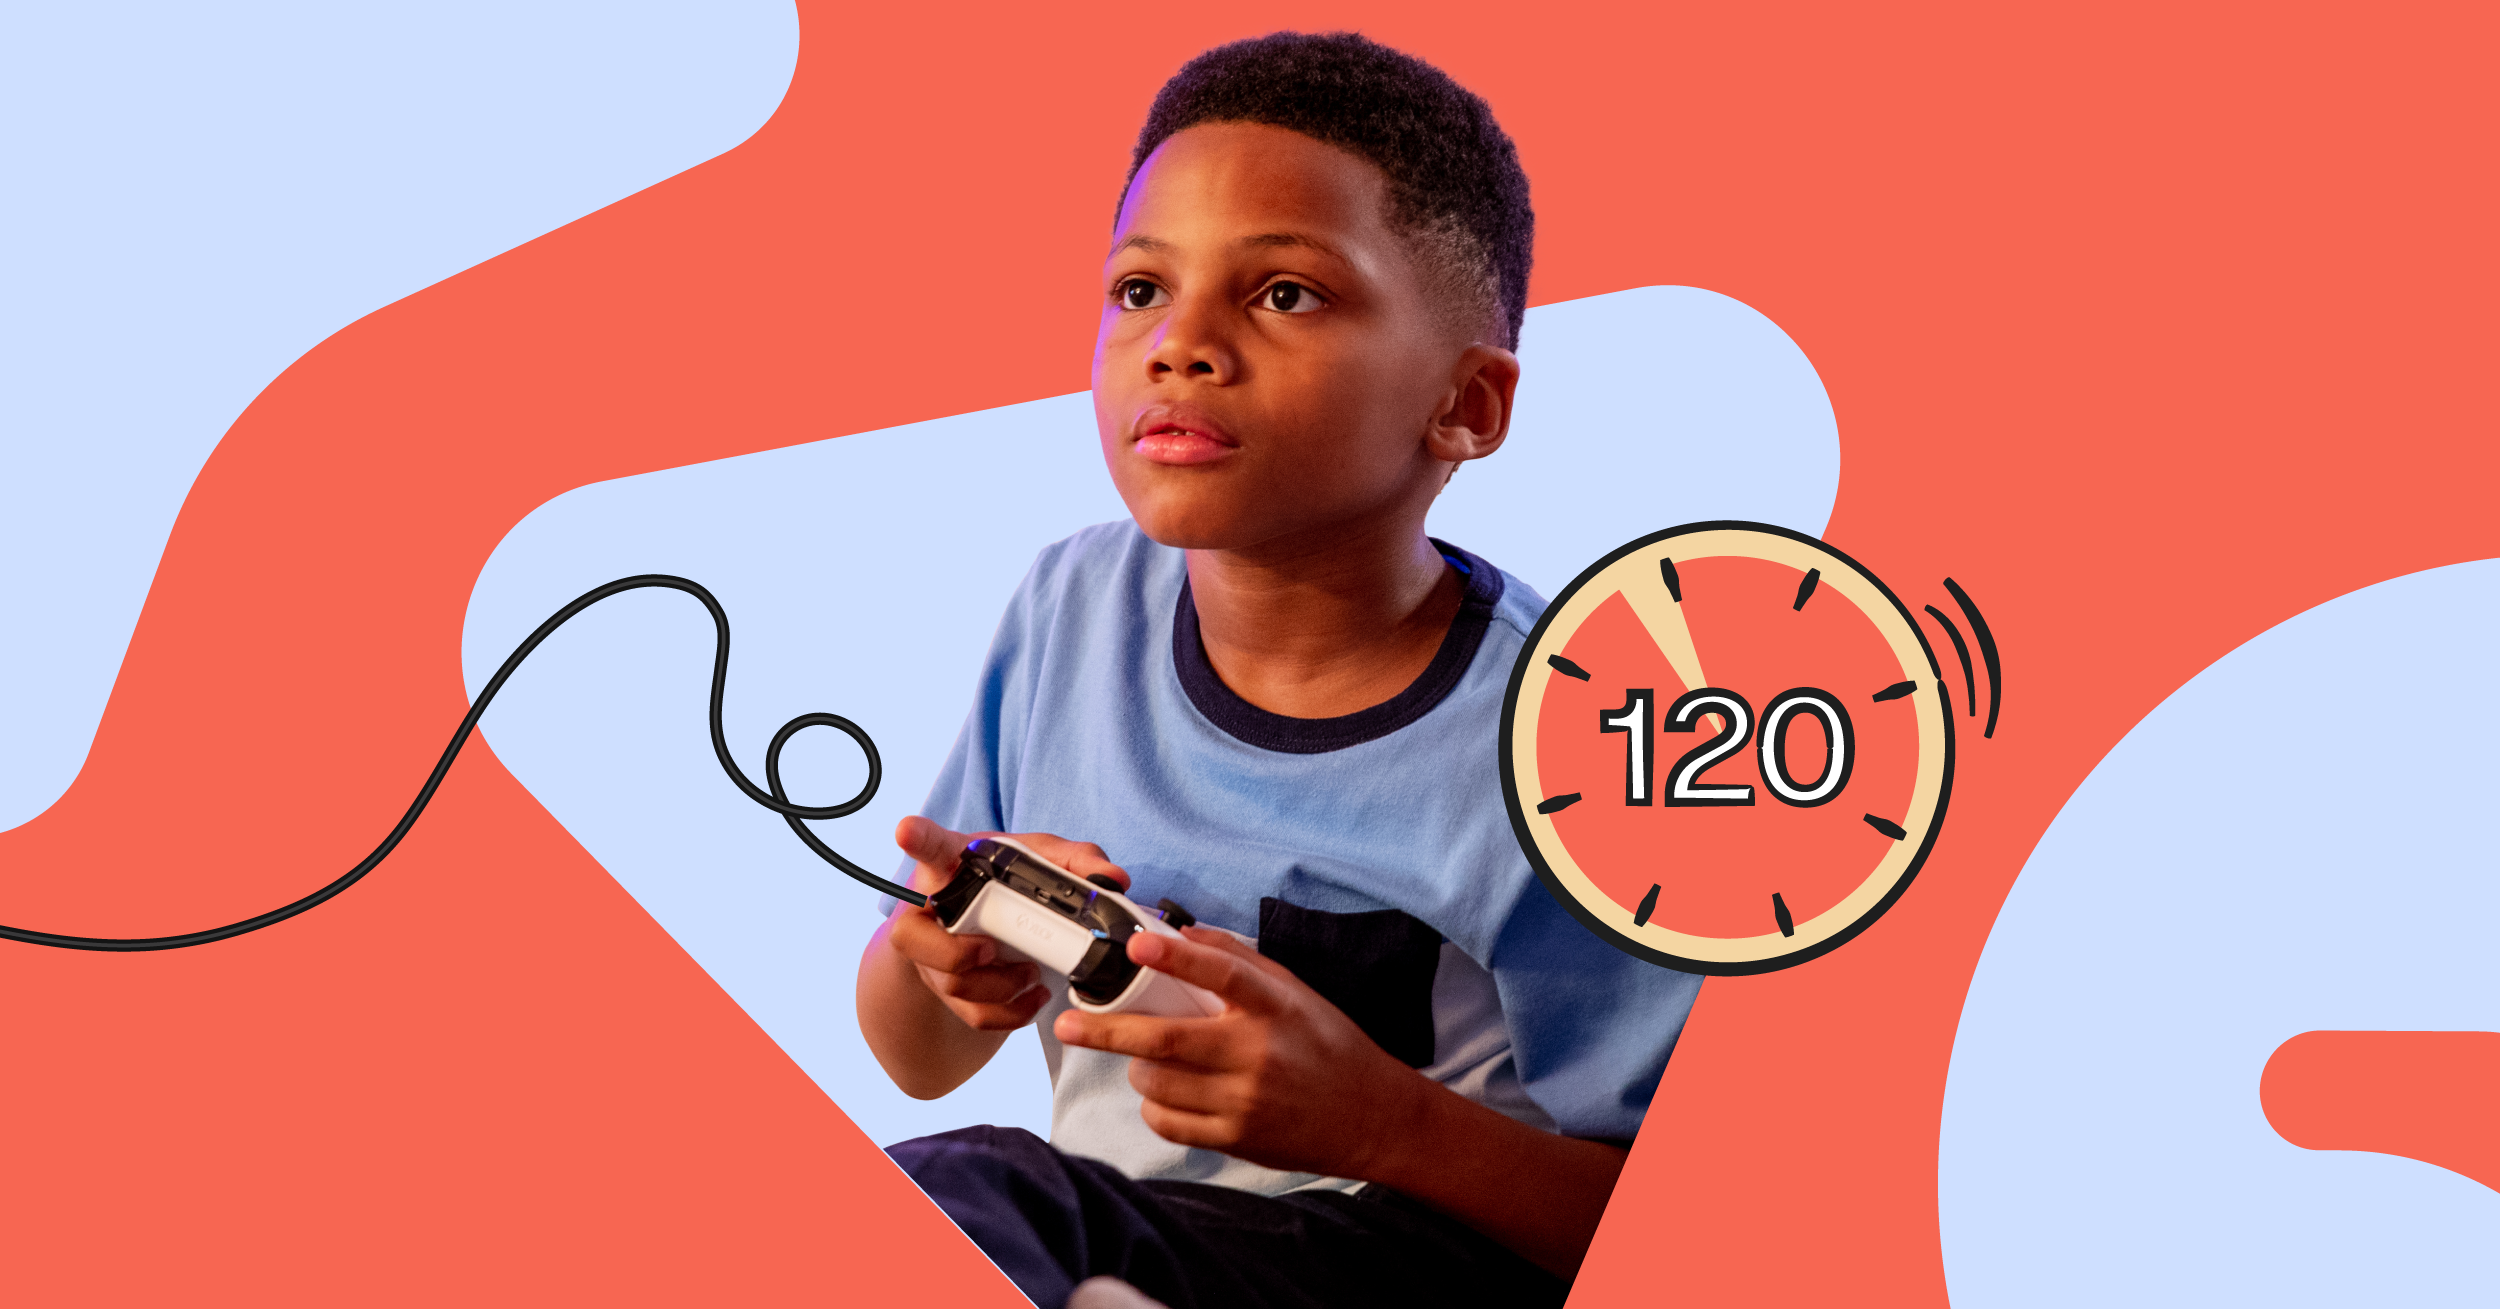 How to Spot Your Child's Video Game Addiction